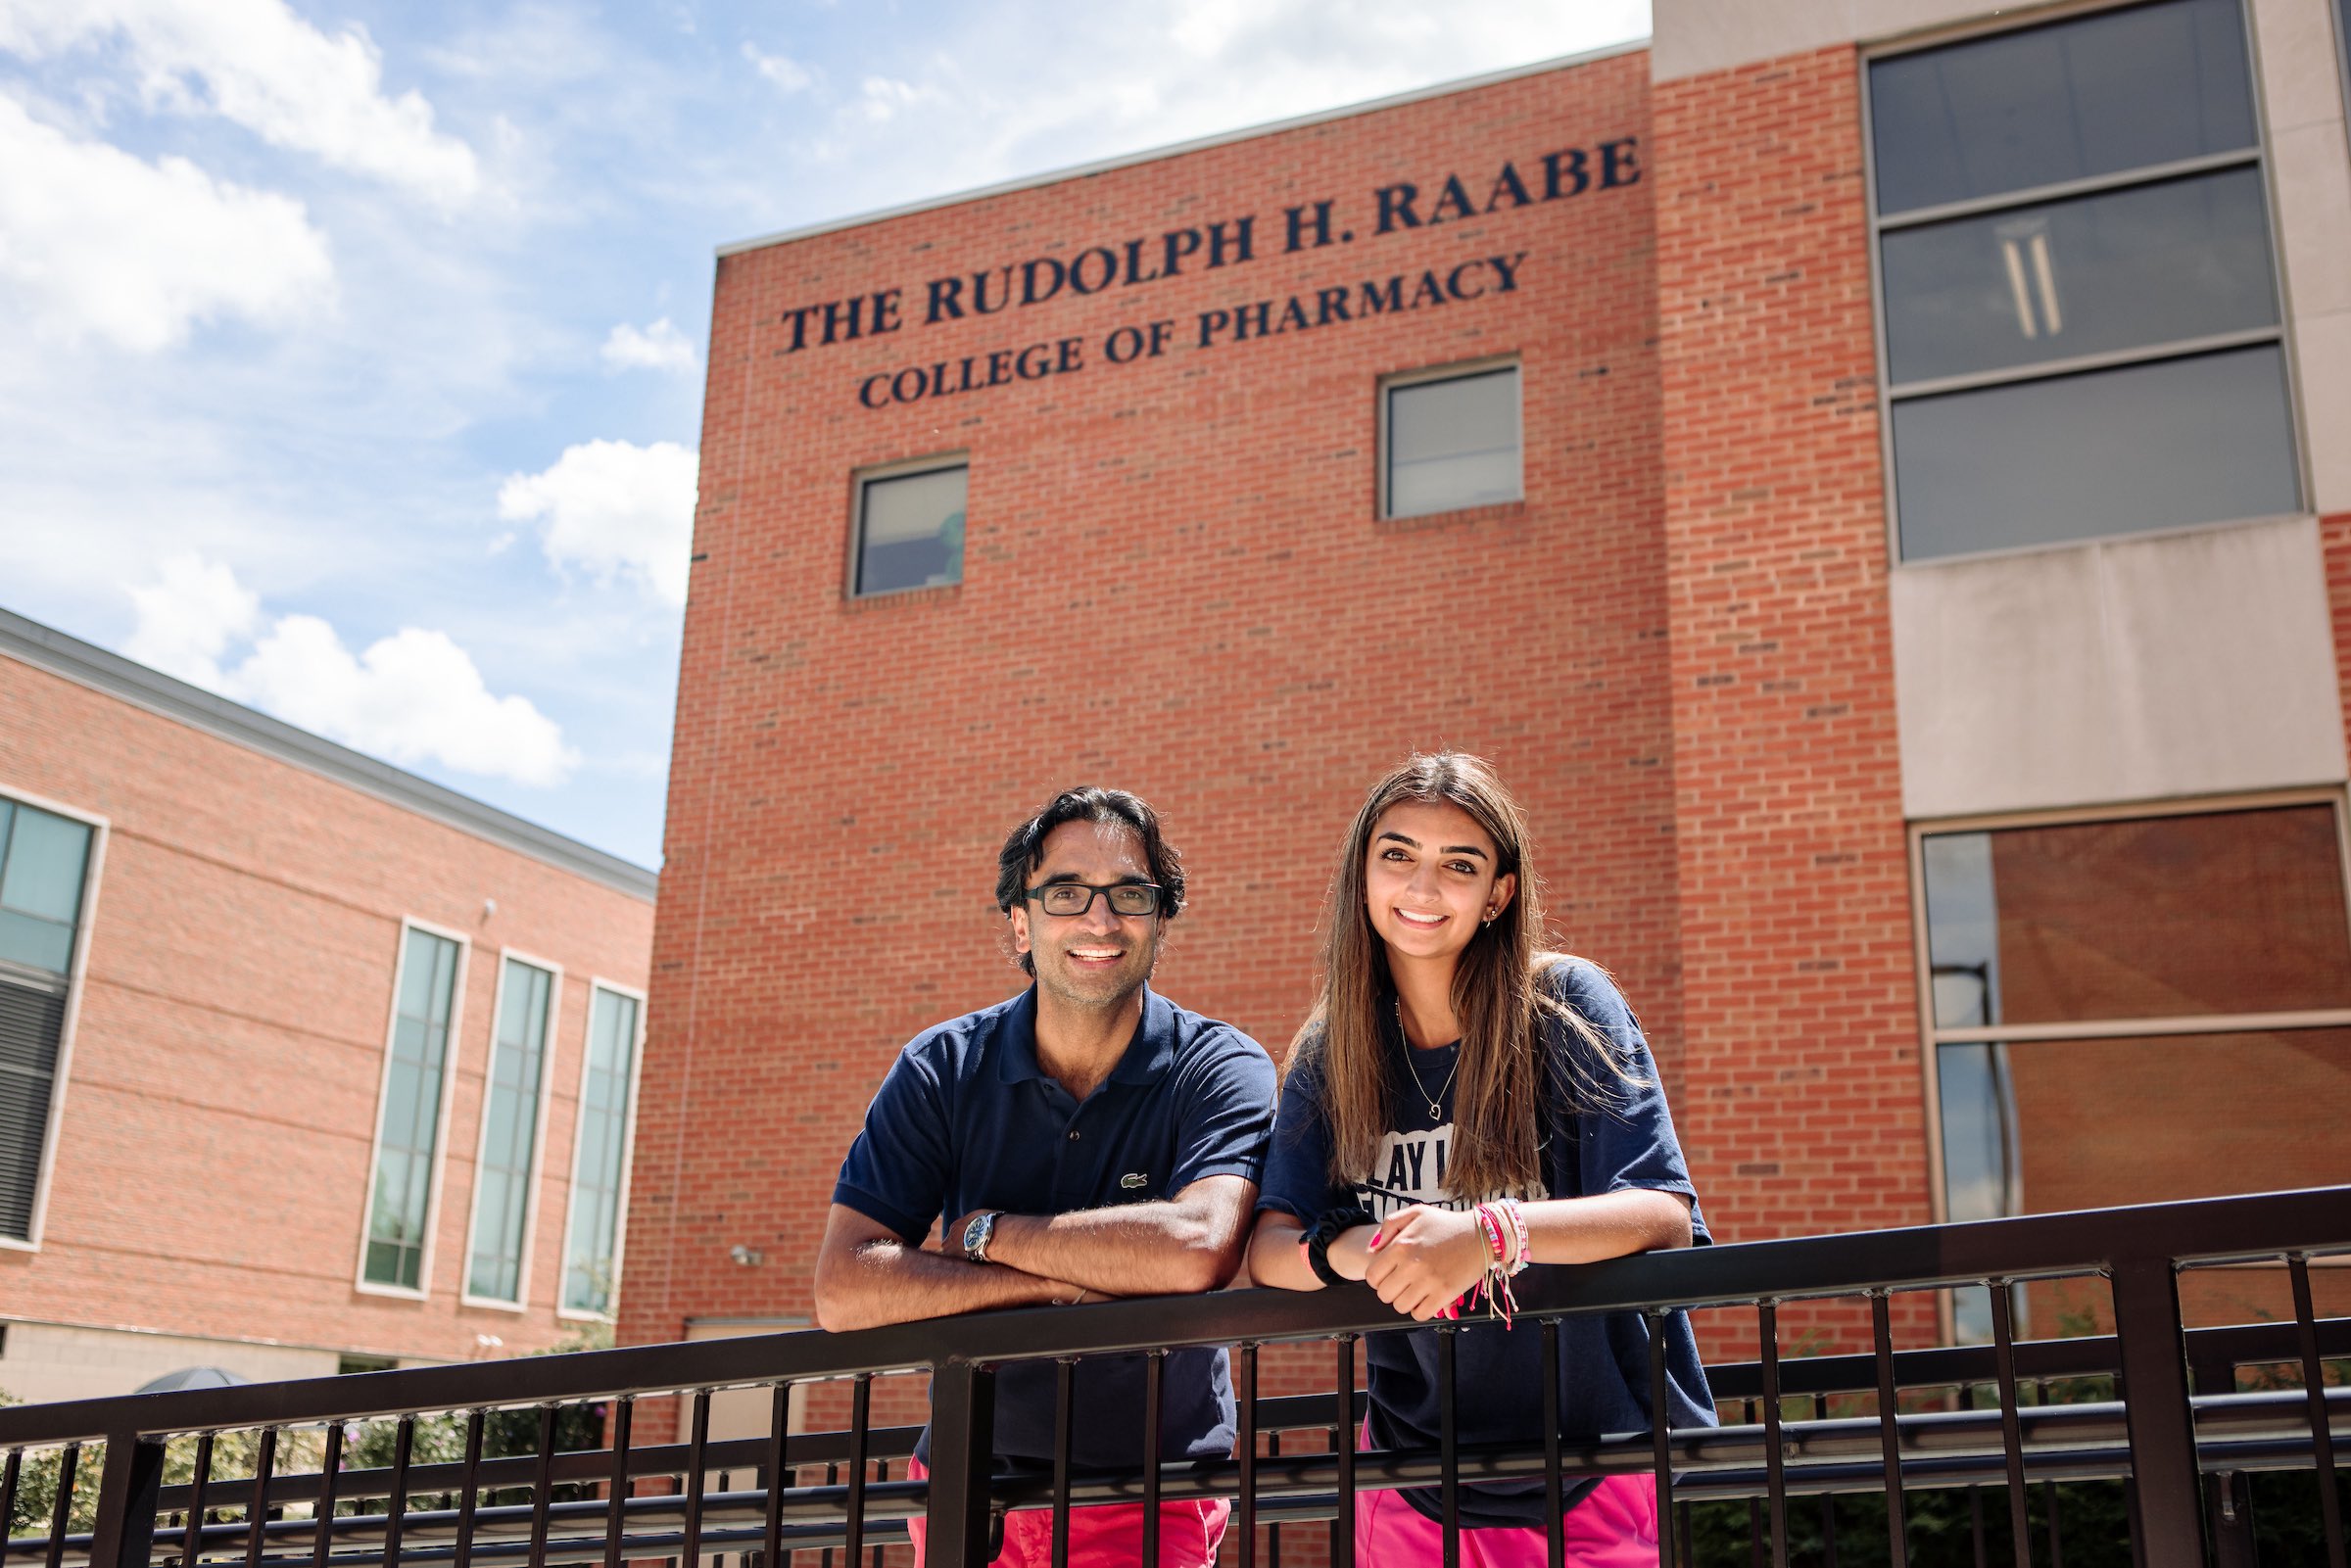 Mayha Jobanputra and her father, Poshin, outside the Raabe College of Pharmacy at Ohio Northern University.